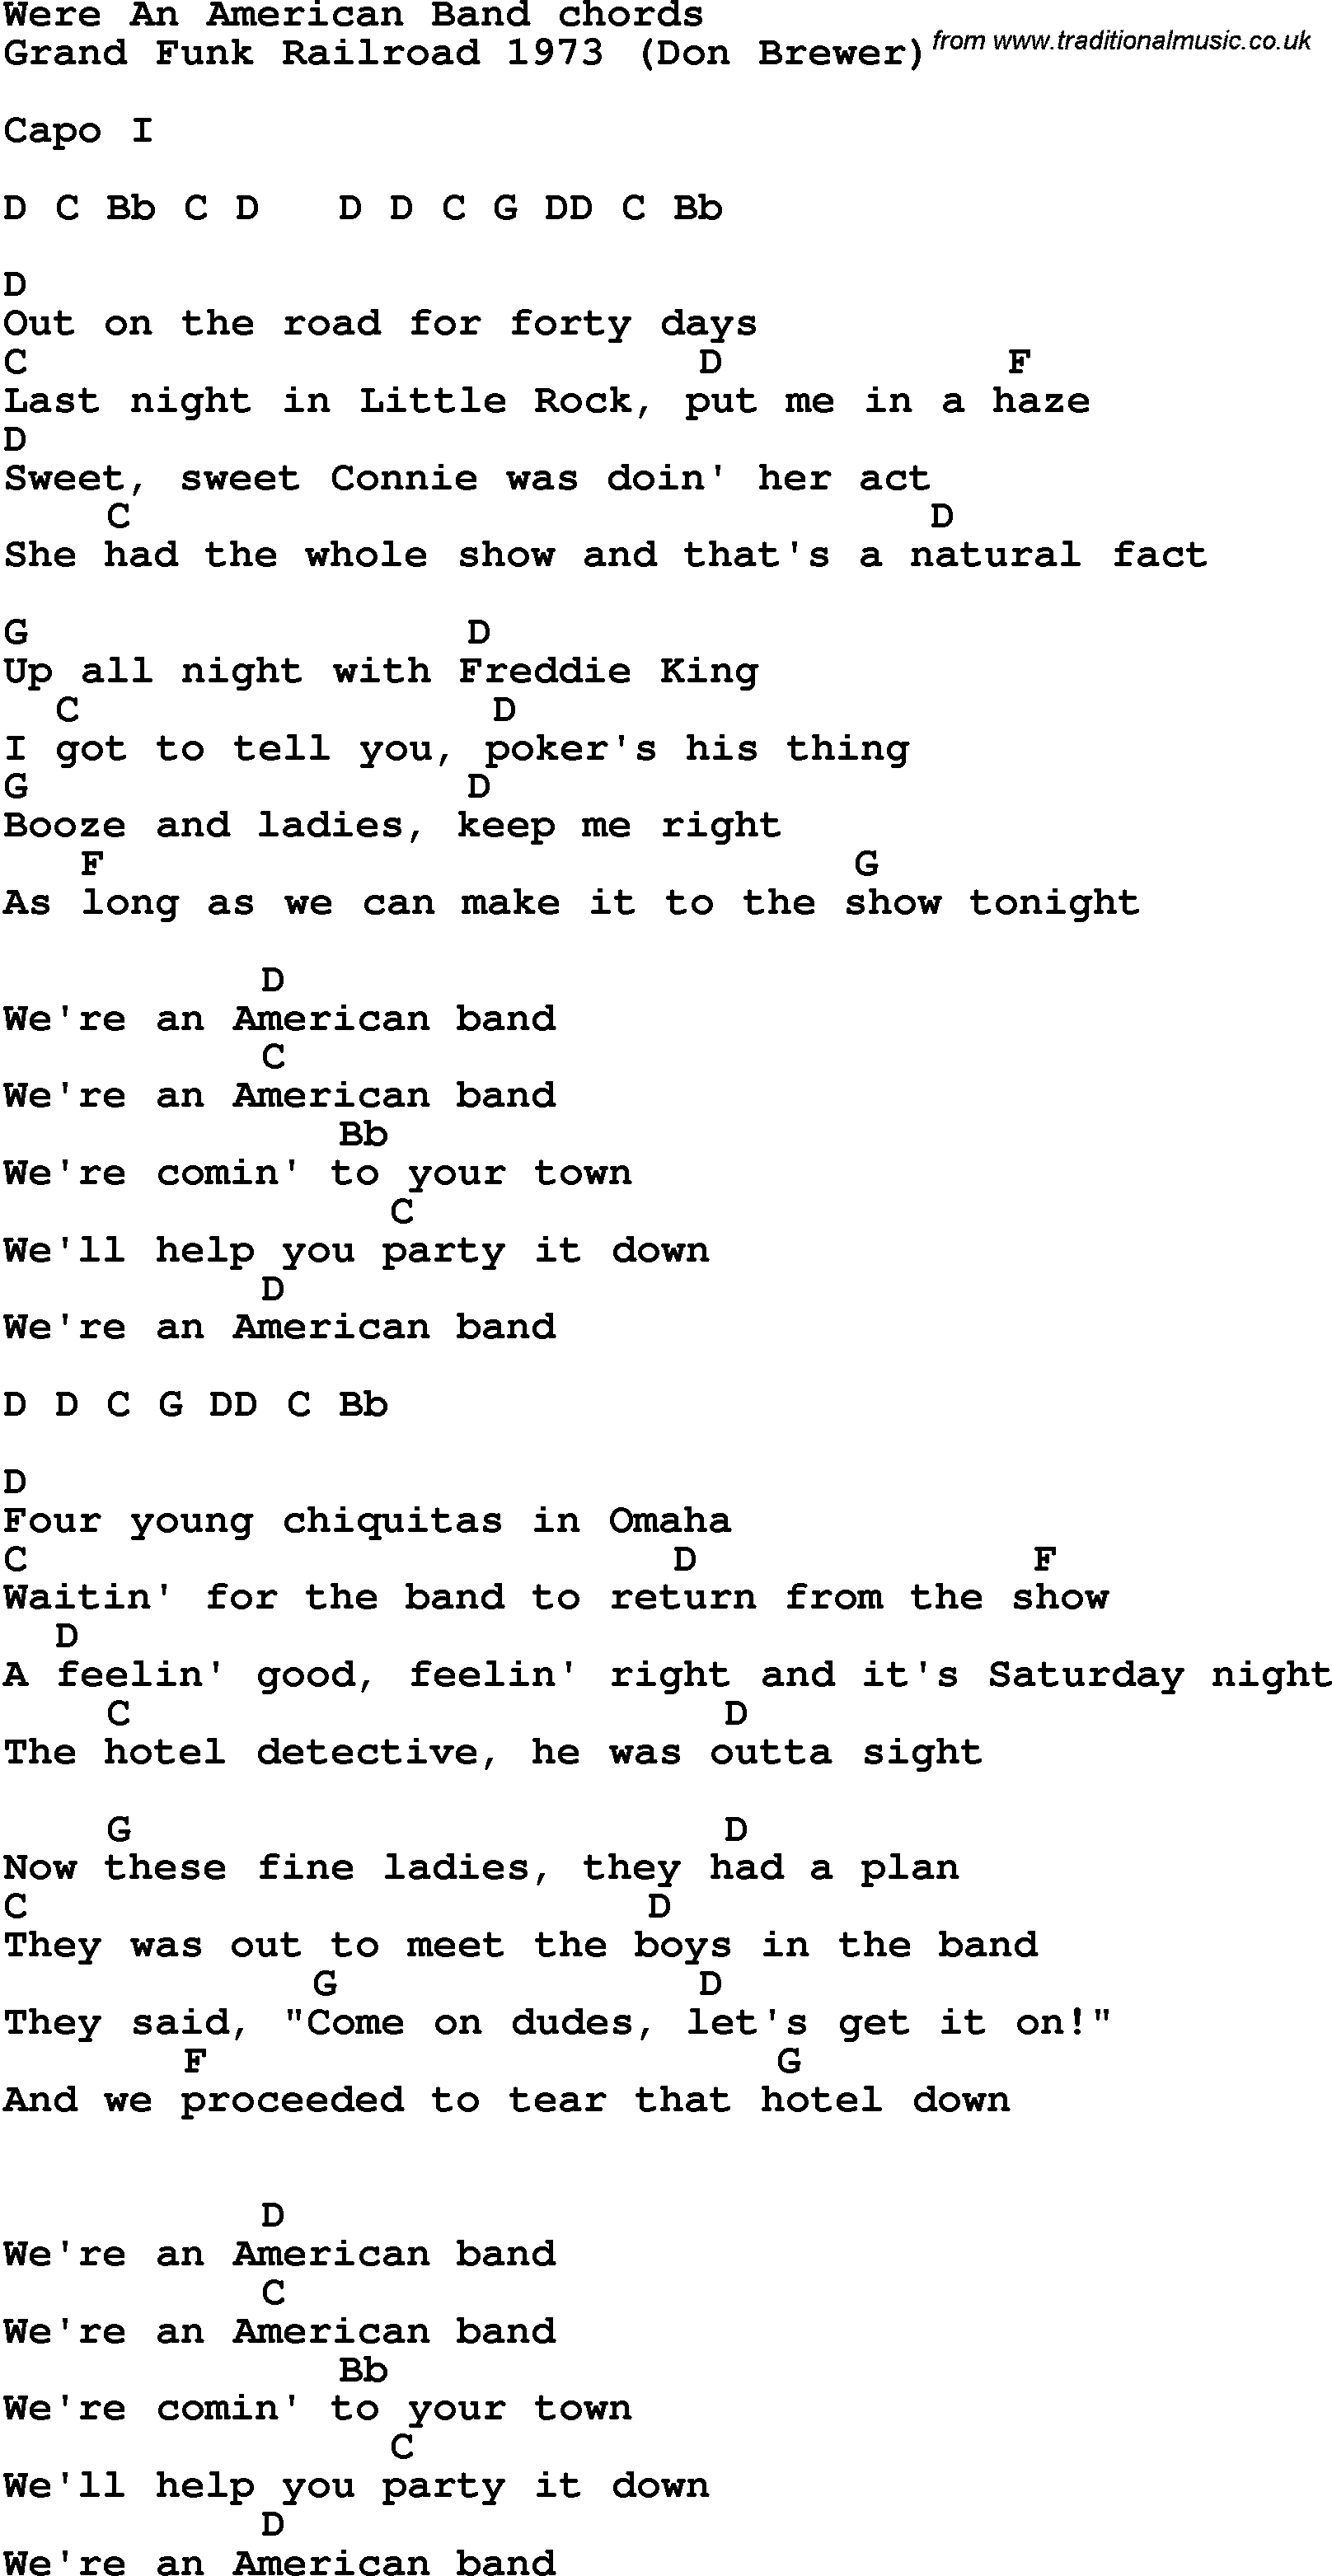 Song Lyrics with guitar chords for We're An American Band